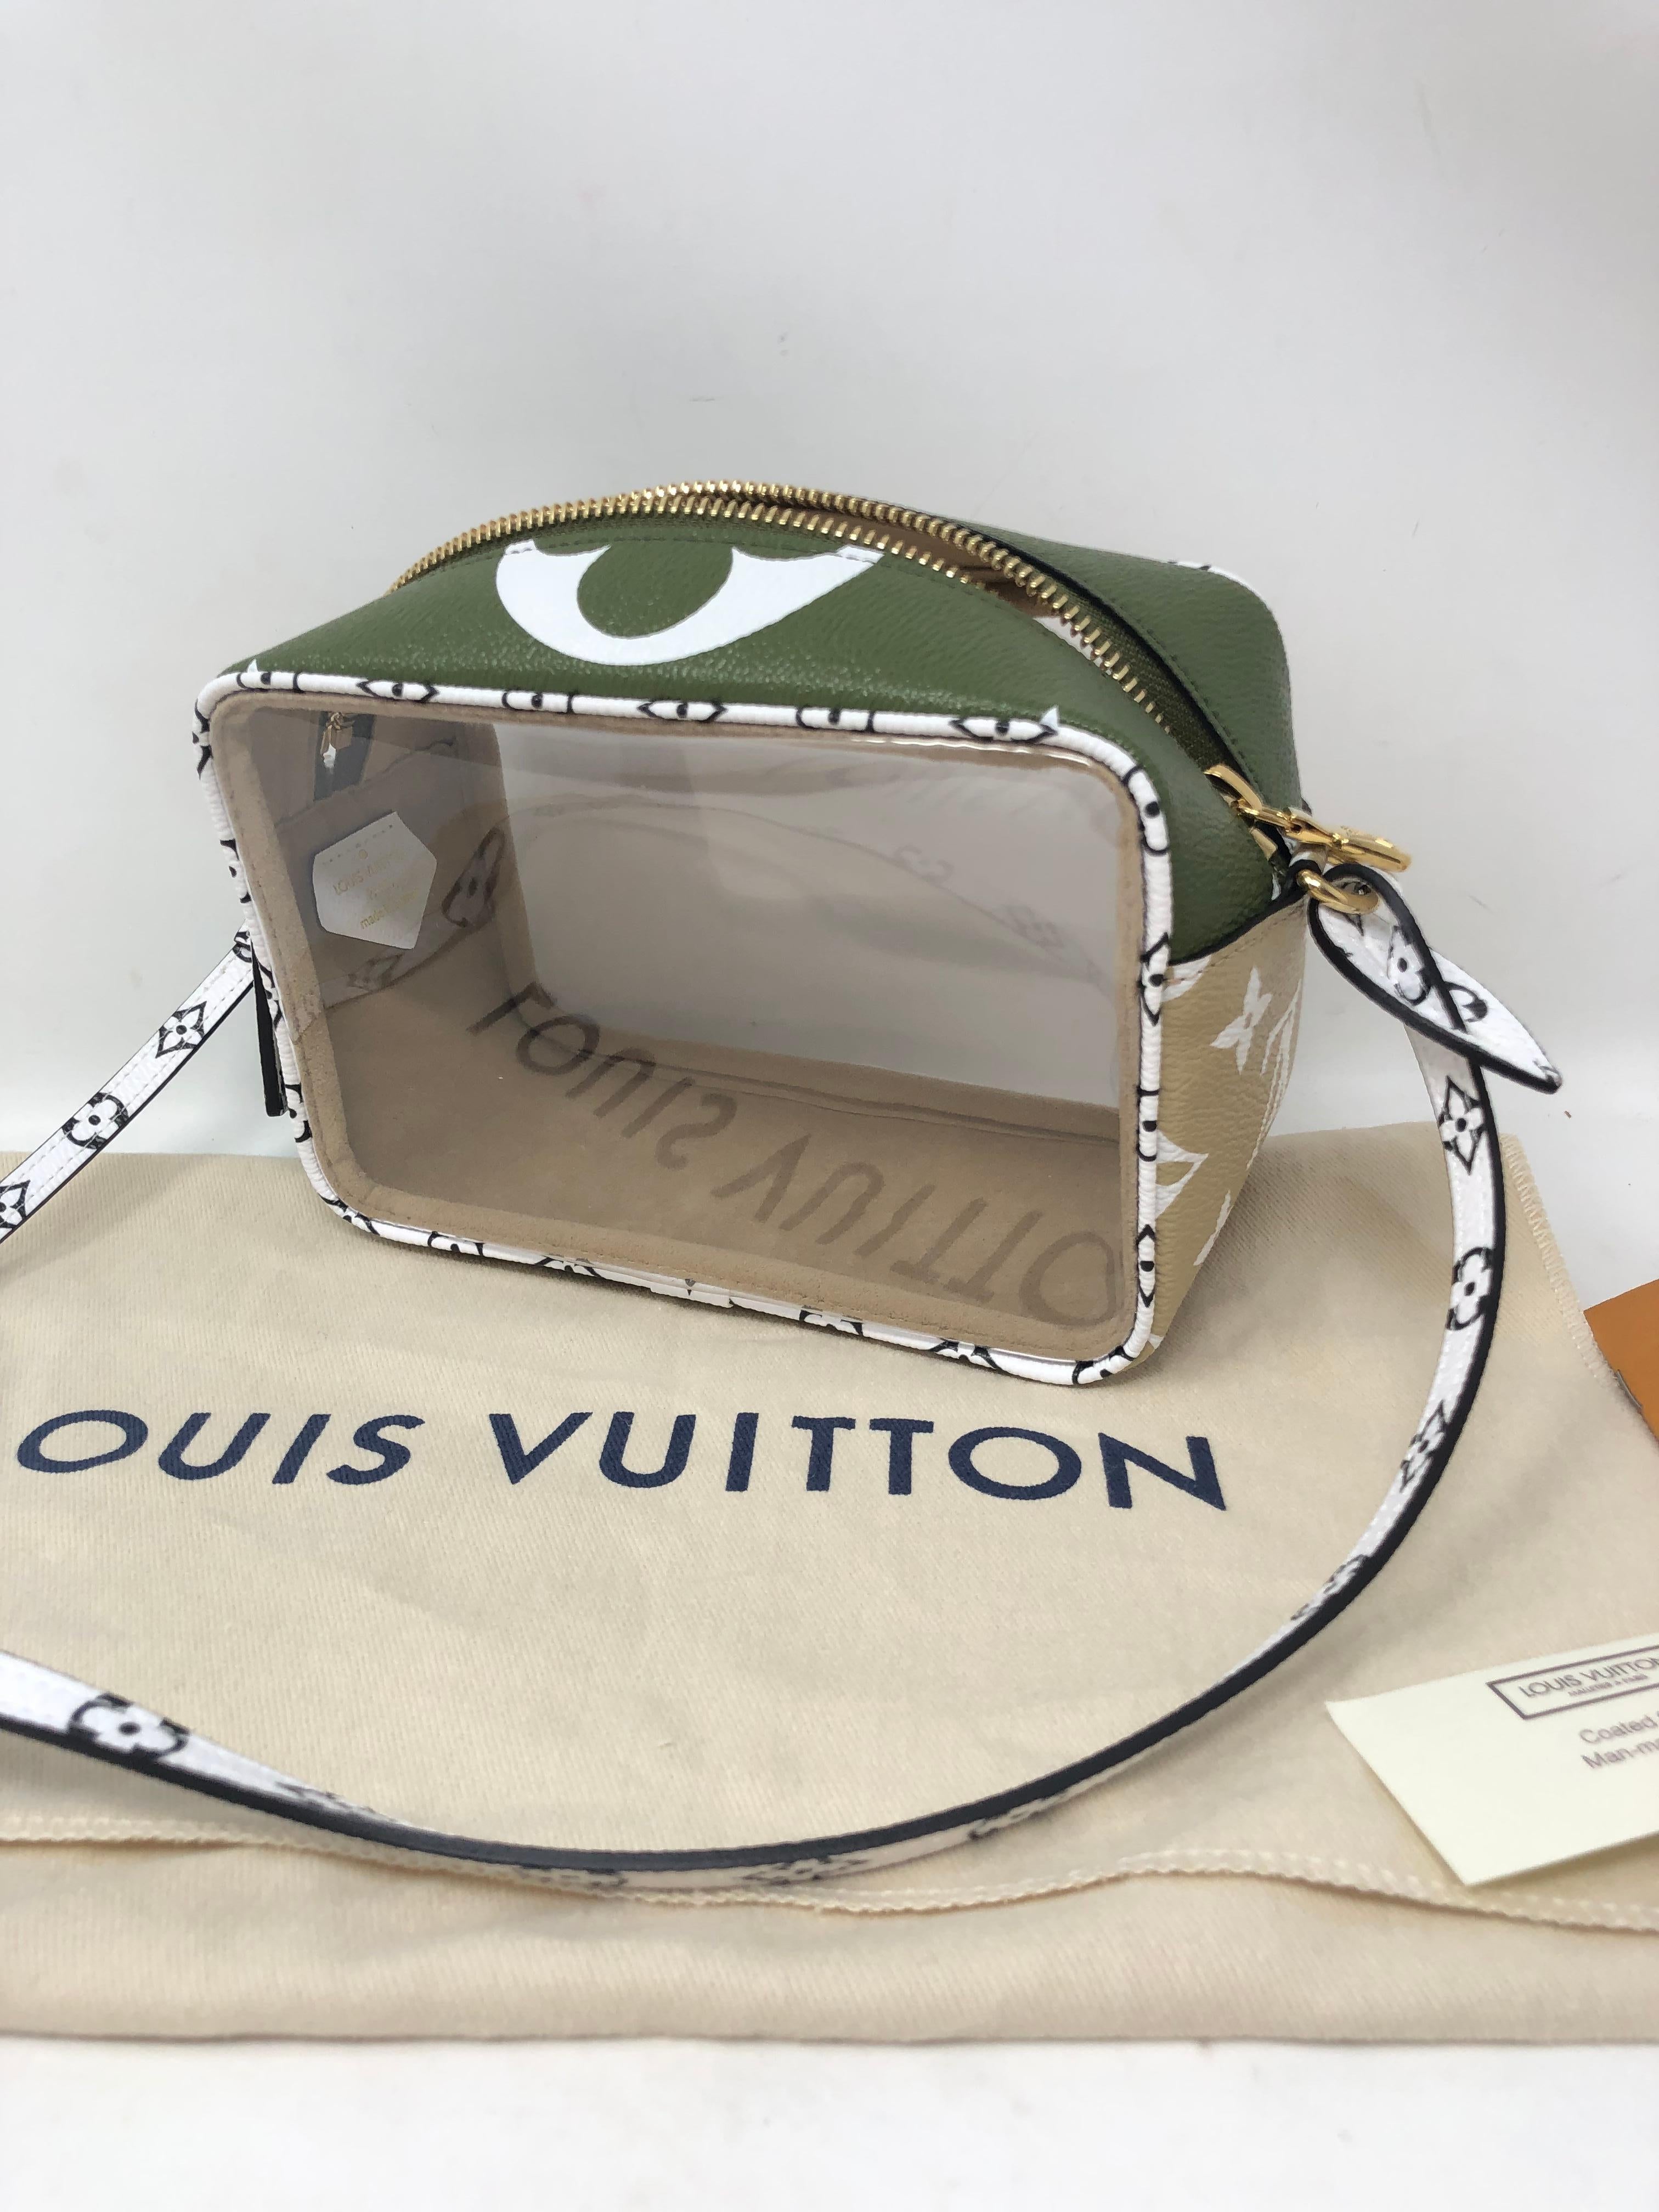 Louis Vuitton Beach Cube Giant Monogram Khaki Green/ Beige Pouch. Brand new and limited. See through bag that is all the rage. Collect this line. Includes dust cover and box. Guaranteed authentic. 